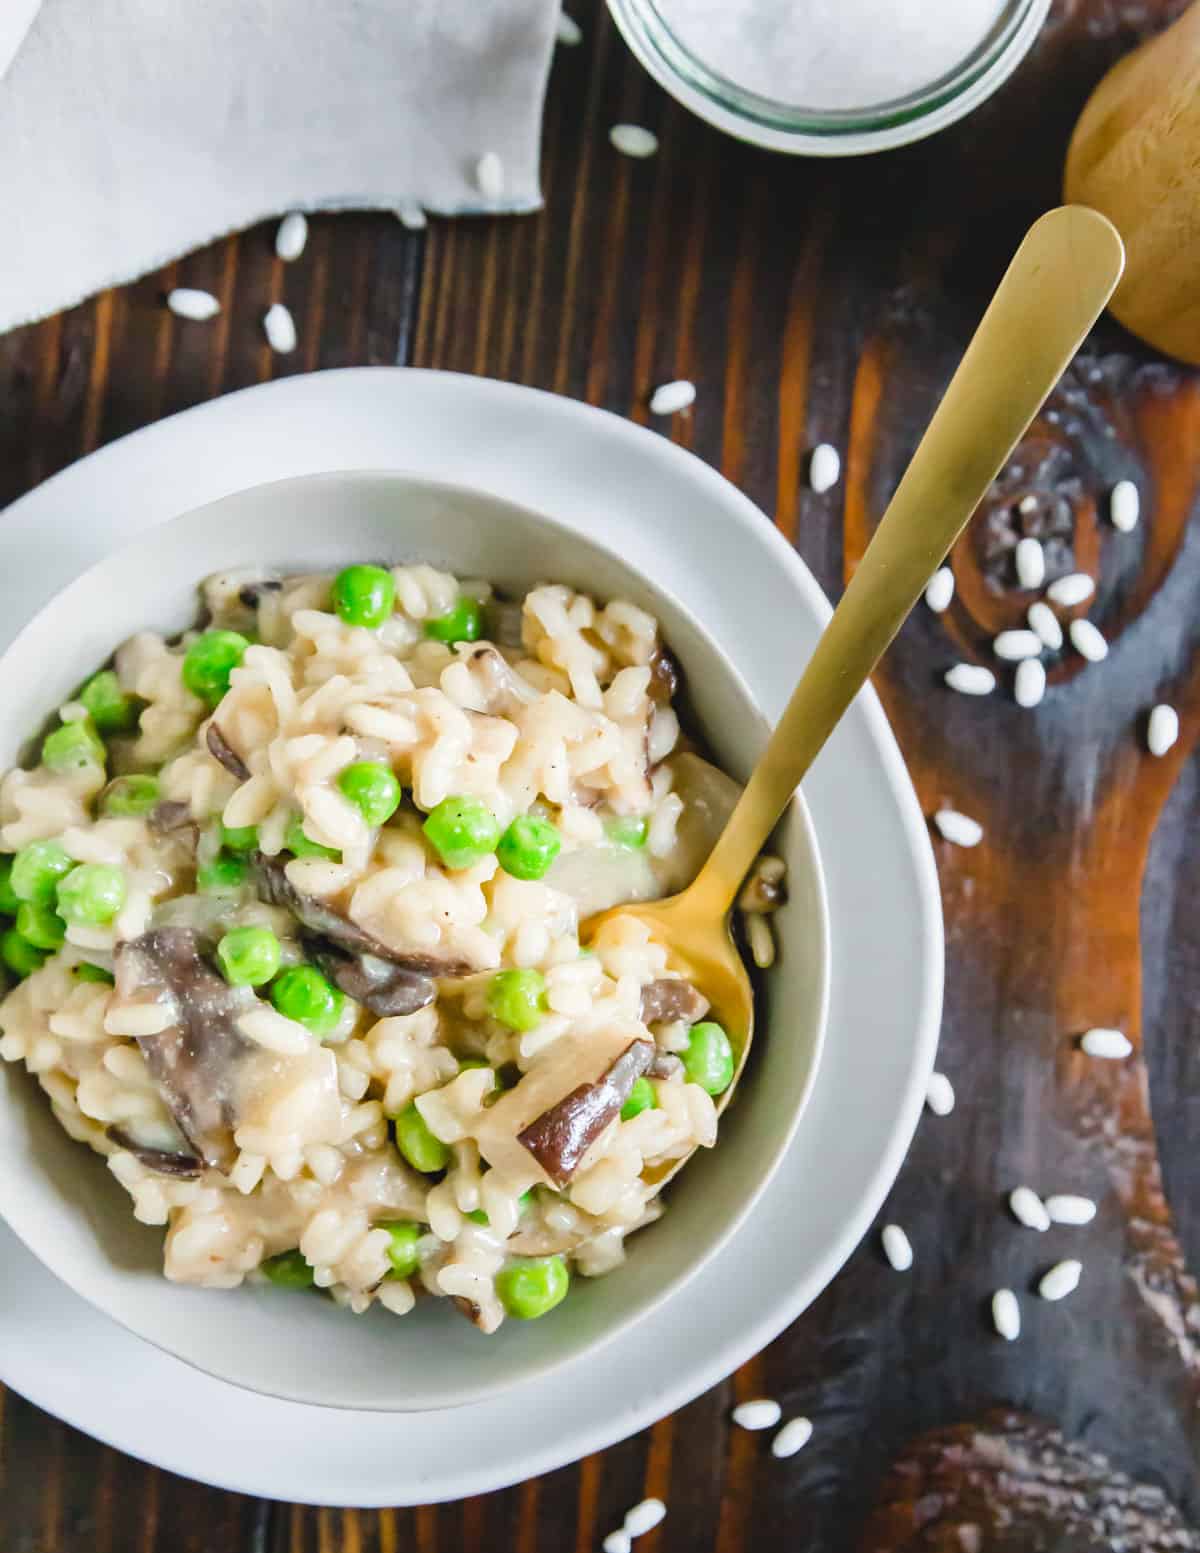 Creamy, decadent and rich vegan mushroom and pea risotto